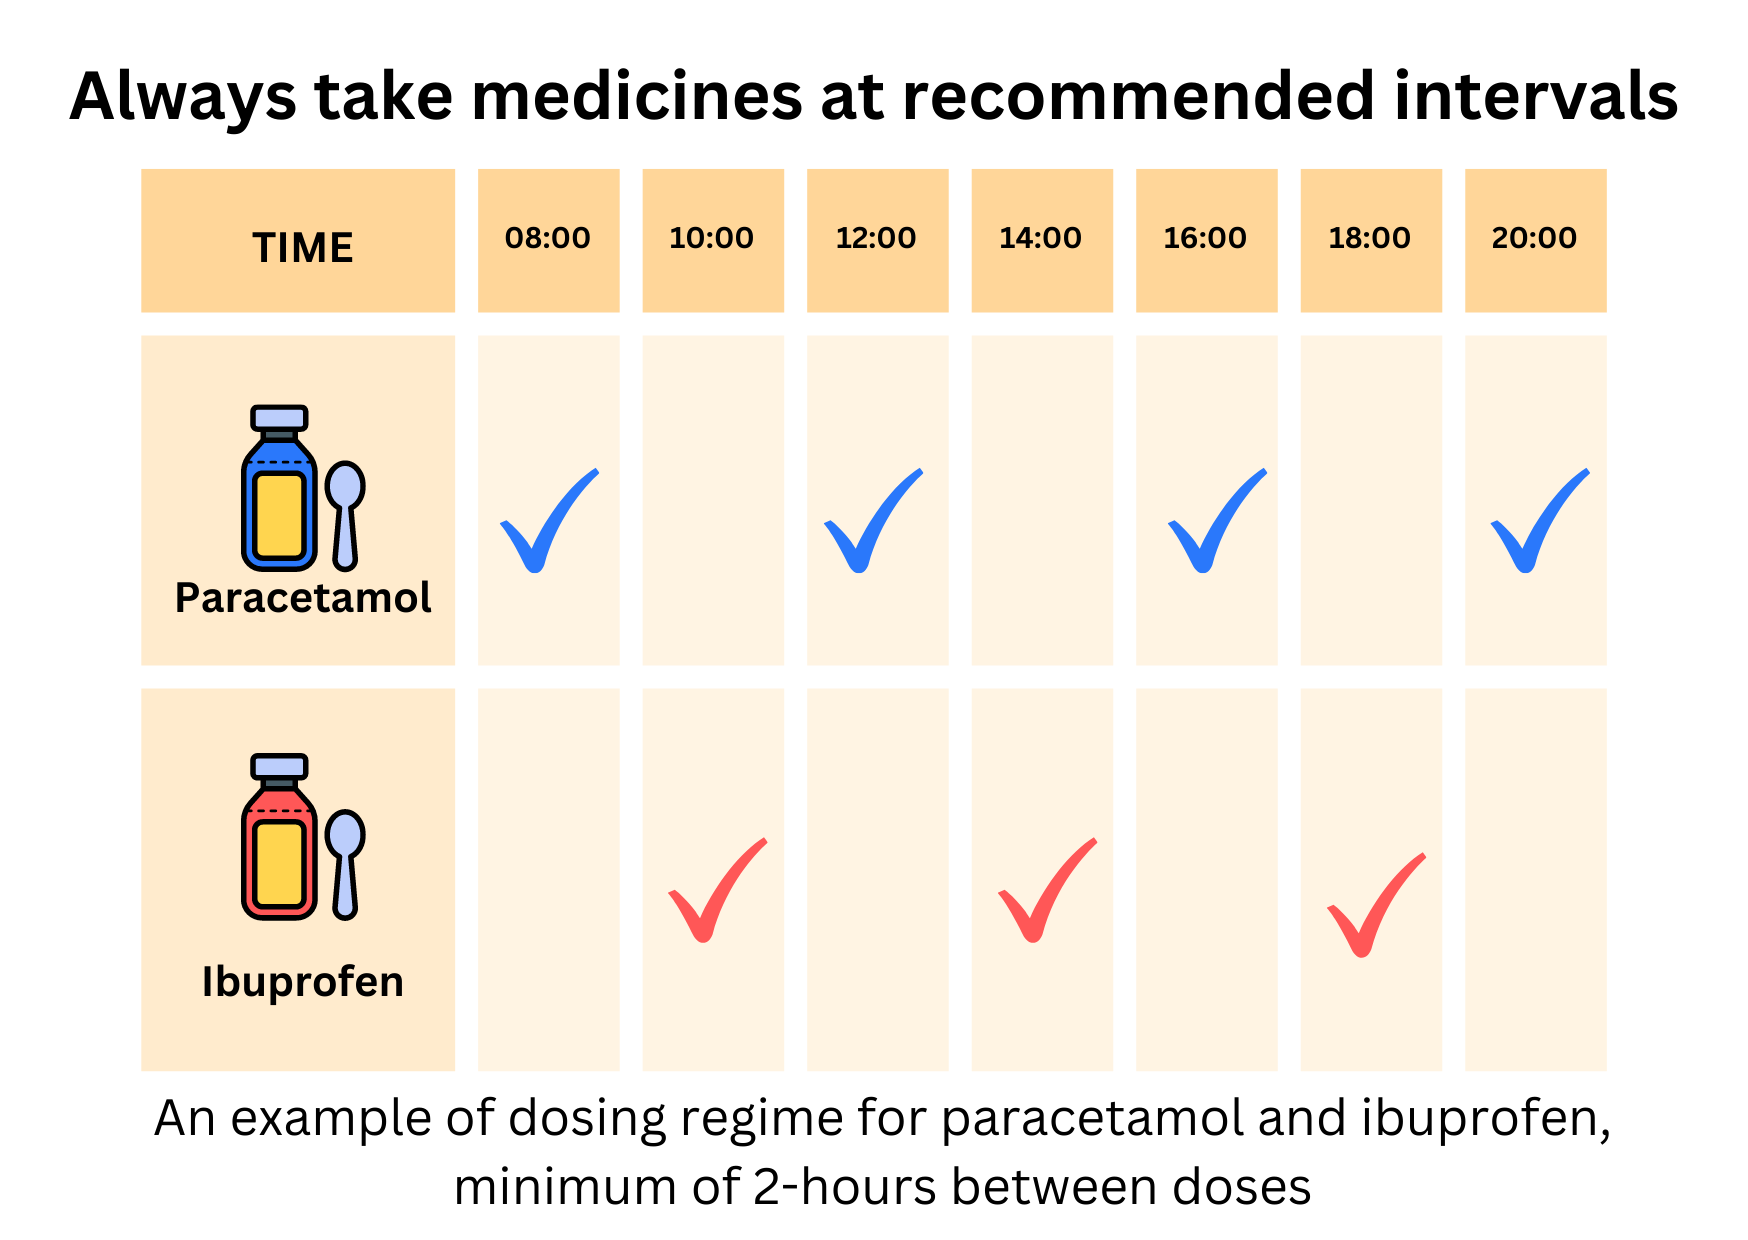 Chart showing the recommended intervals for giving paracetamol and ibuprofen, alternating the medicines with a minimum of 2 hours between doses